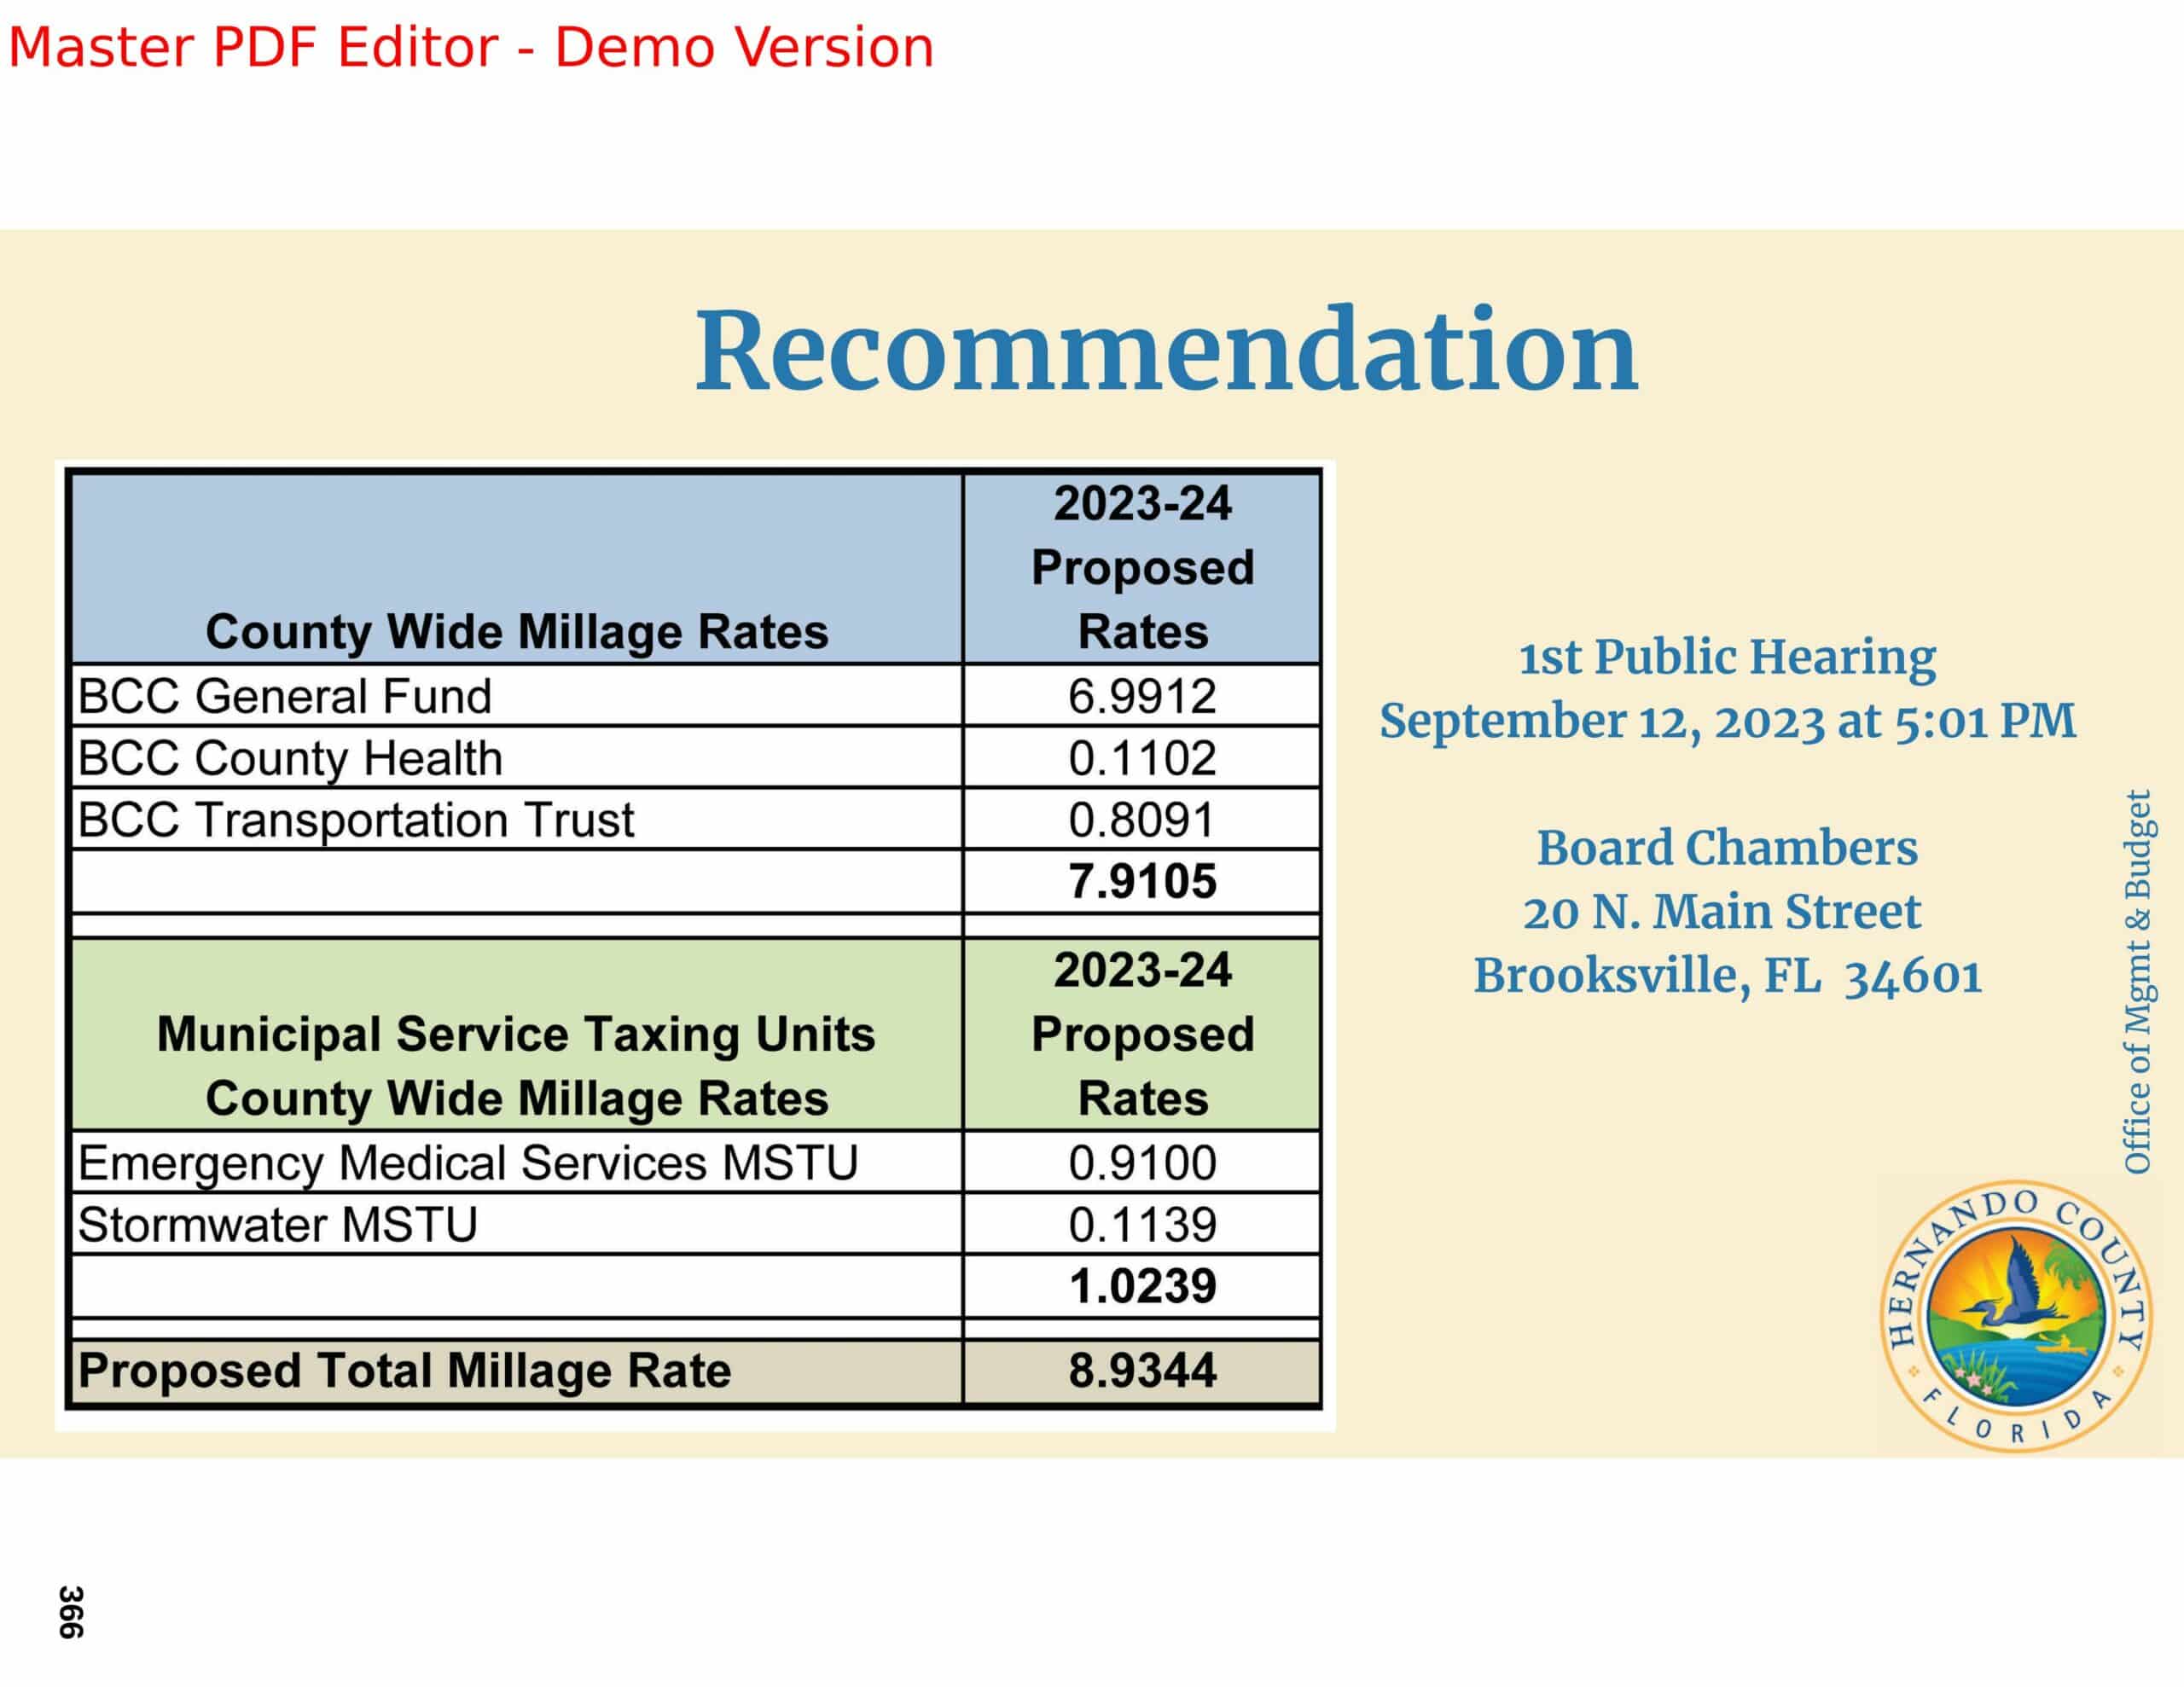 Commissioners approve maximum (tentative) millage rate of 8.9344